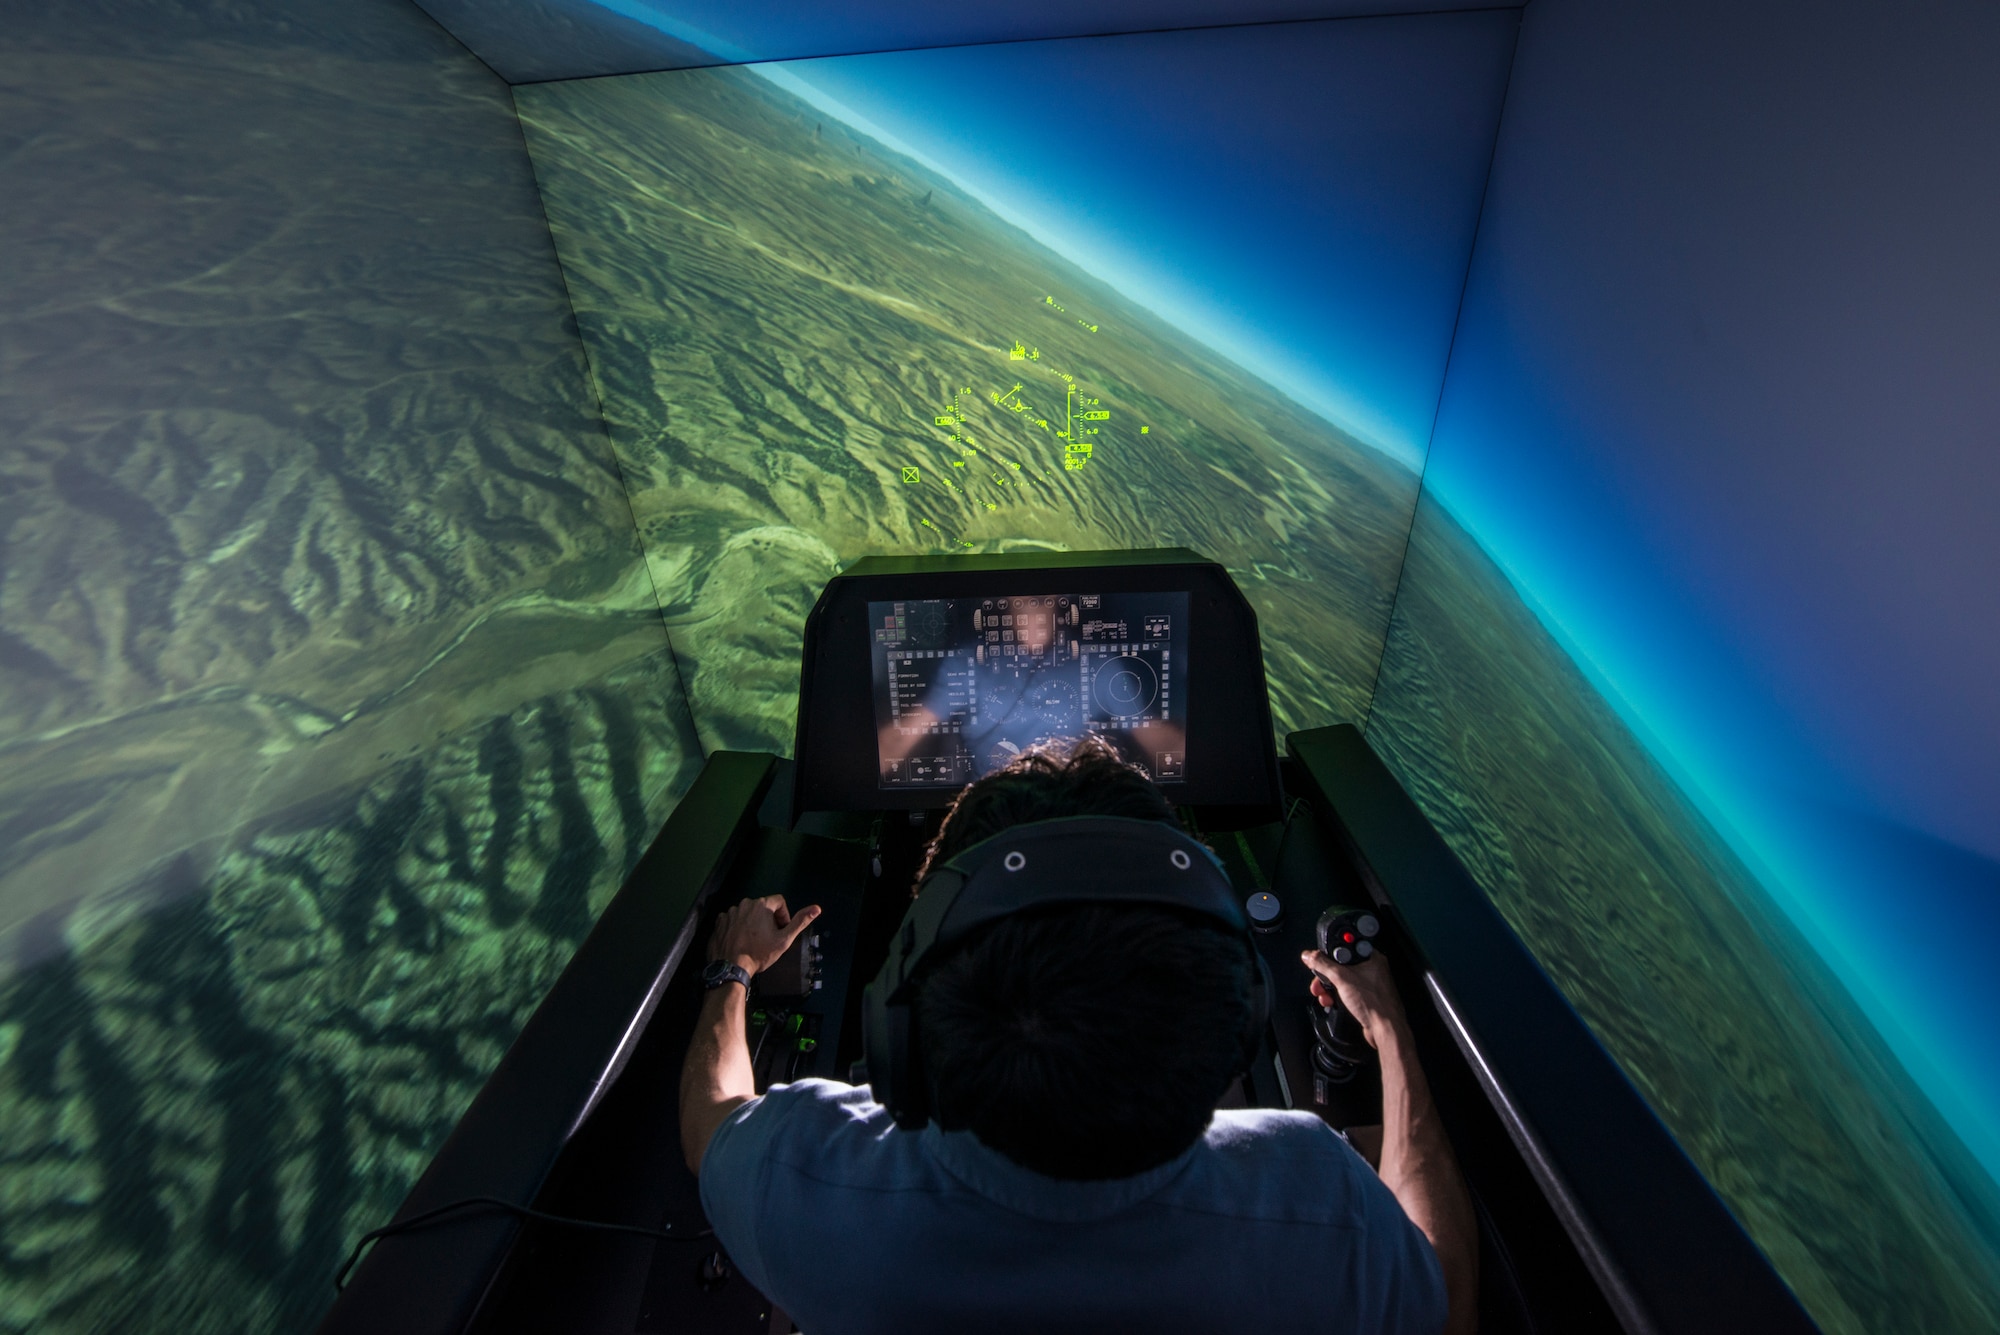 Zach Demers, an aerospace engineer, demonstrates the automatic ground collision avoidance system in an F-16 flight simulator at the Air Force Research Laboratory, Wright-Patterson Air Force Base, Ohio, April 18. Auto GCAS is designed to automatically pull a jet away from the ground if a pilot is disoriented or unable to do so. (U.S. Air Force photo/Master Sgt. Brian Ferguson)